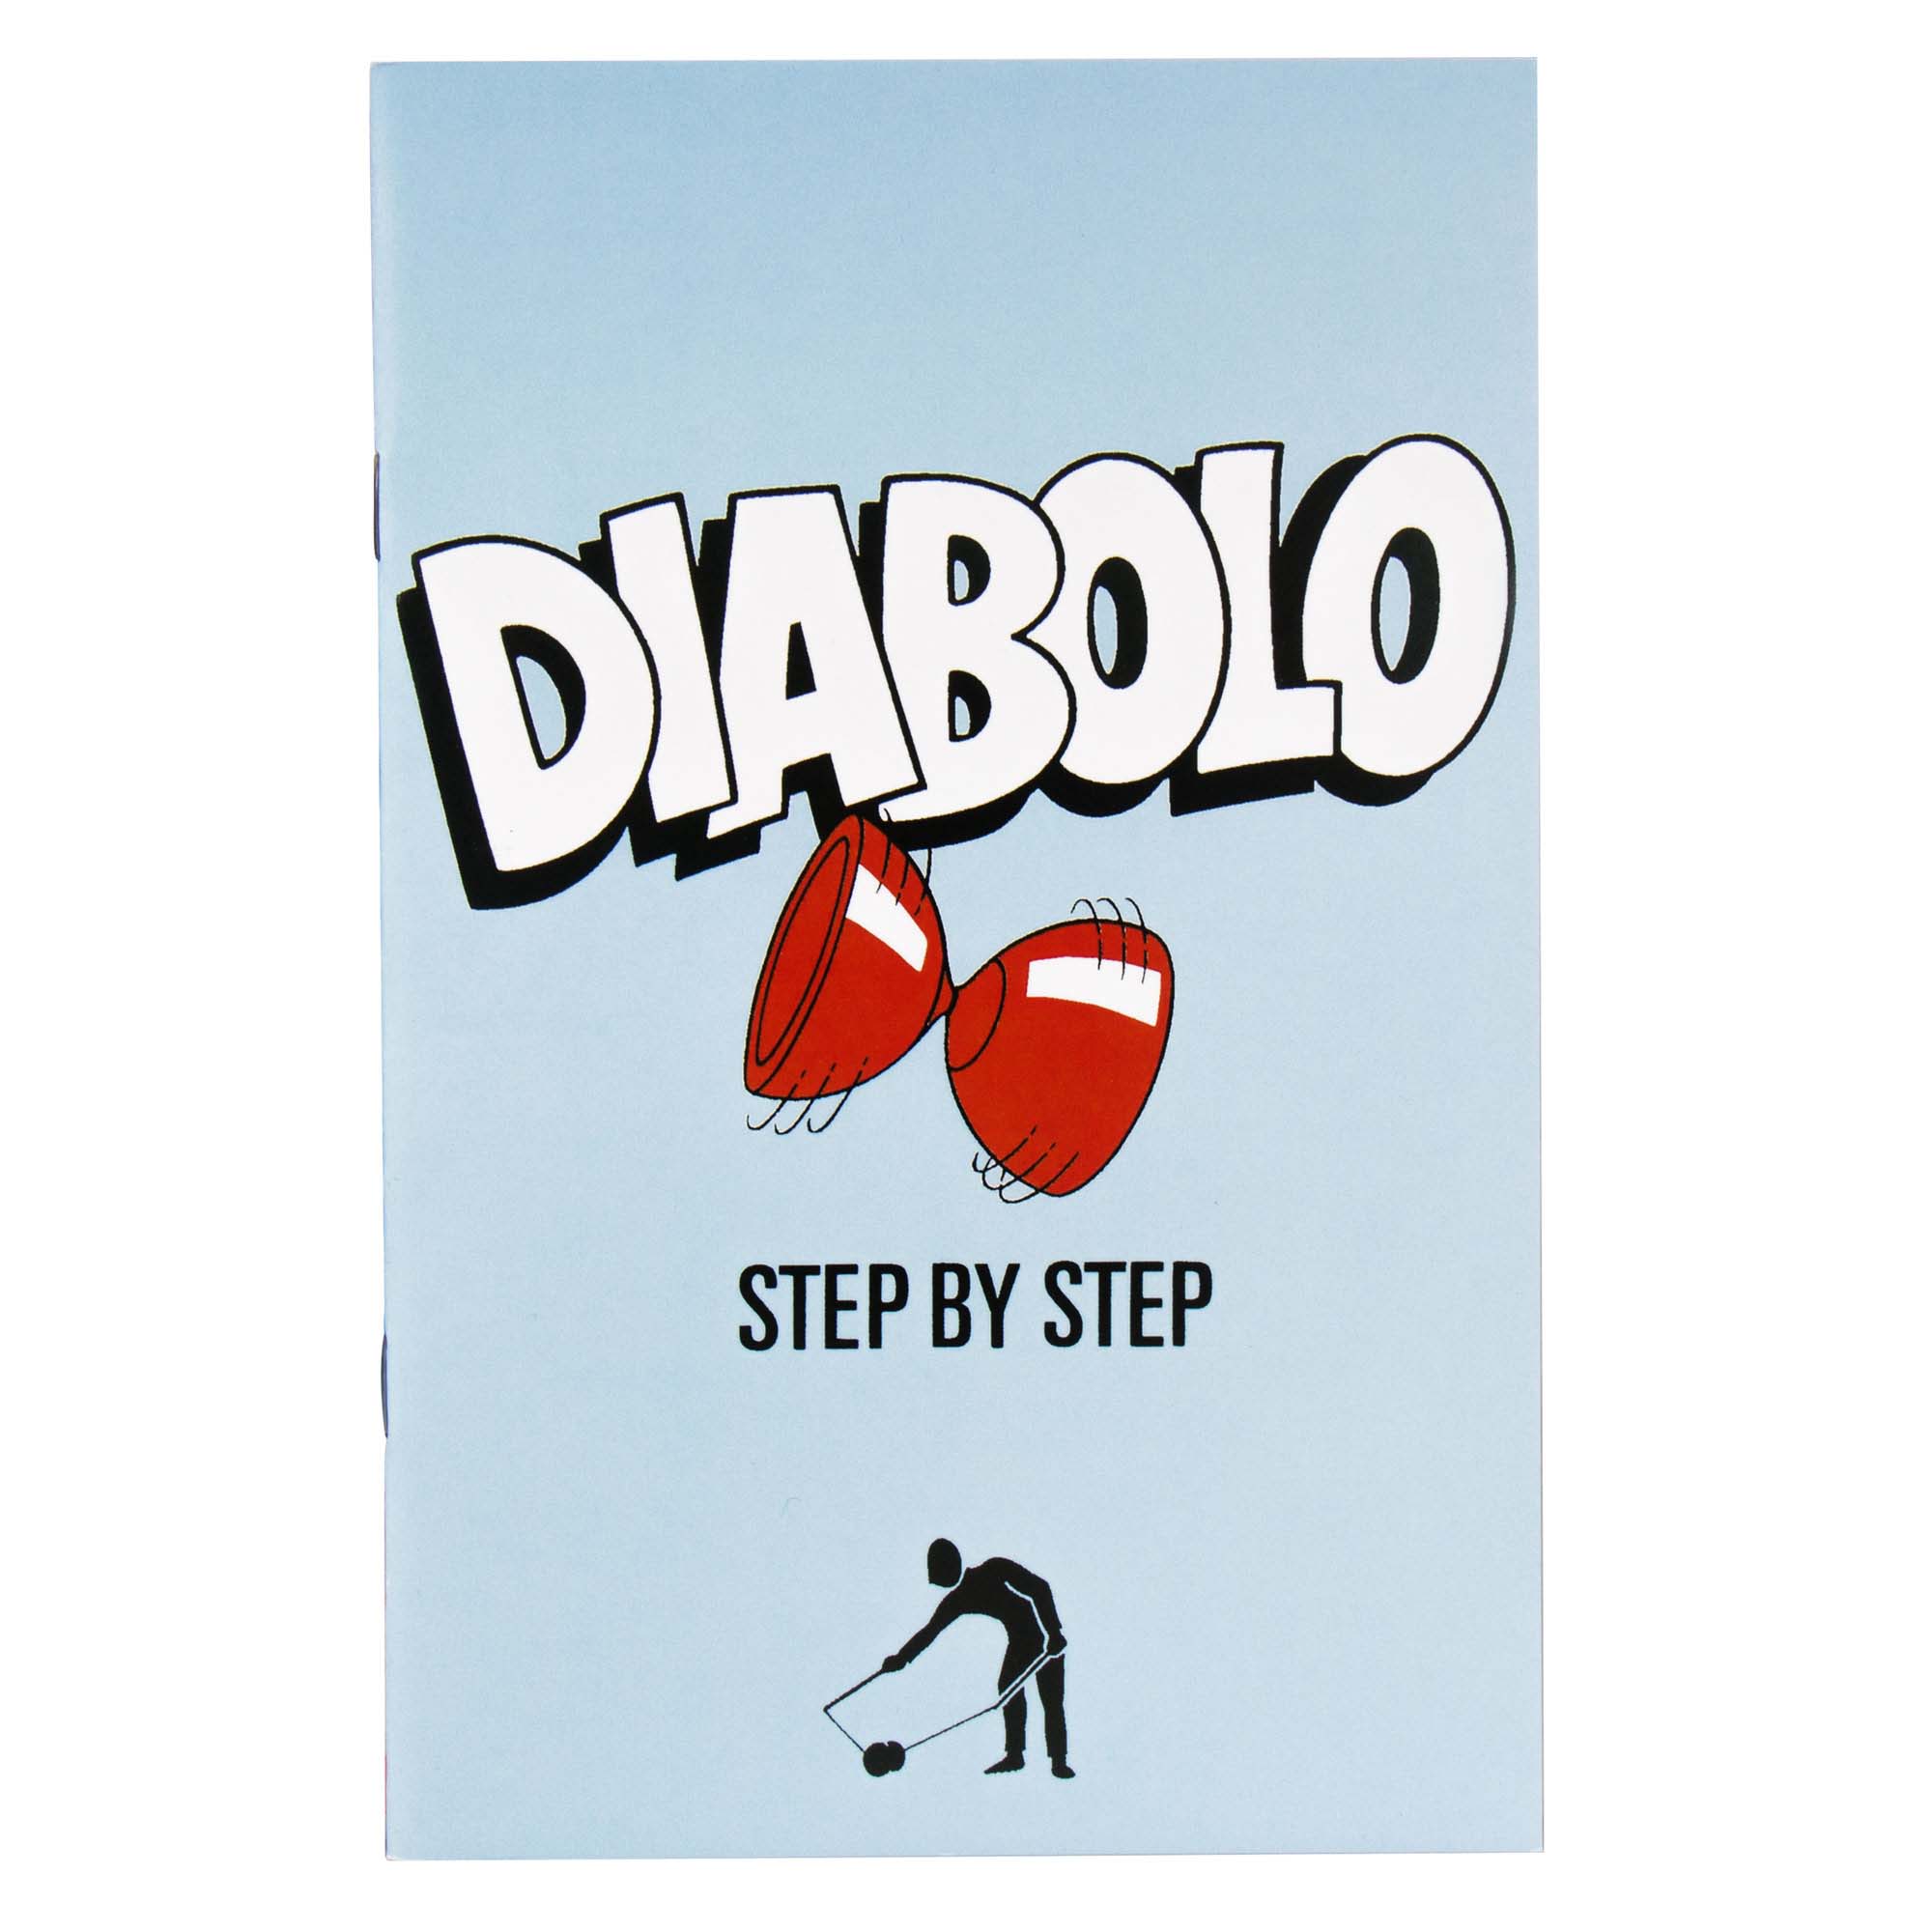 Book titled diabolo step by step